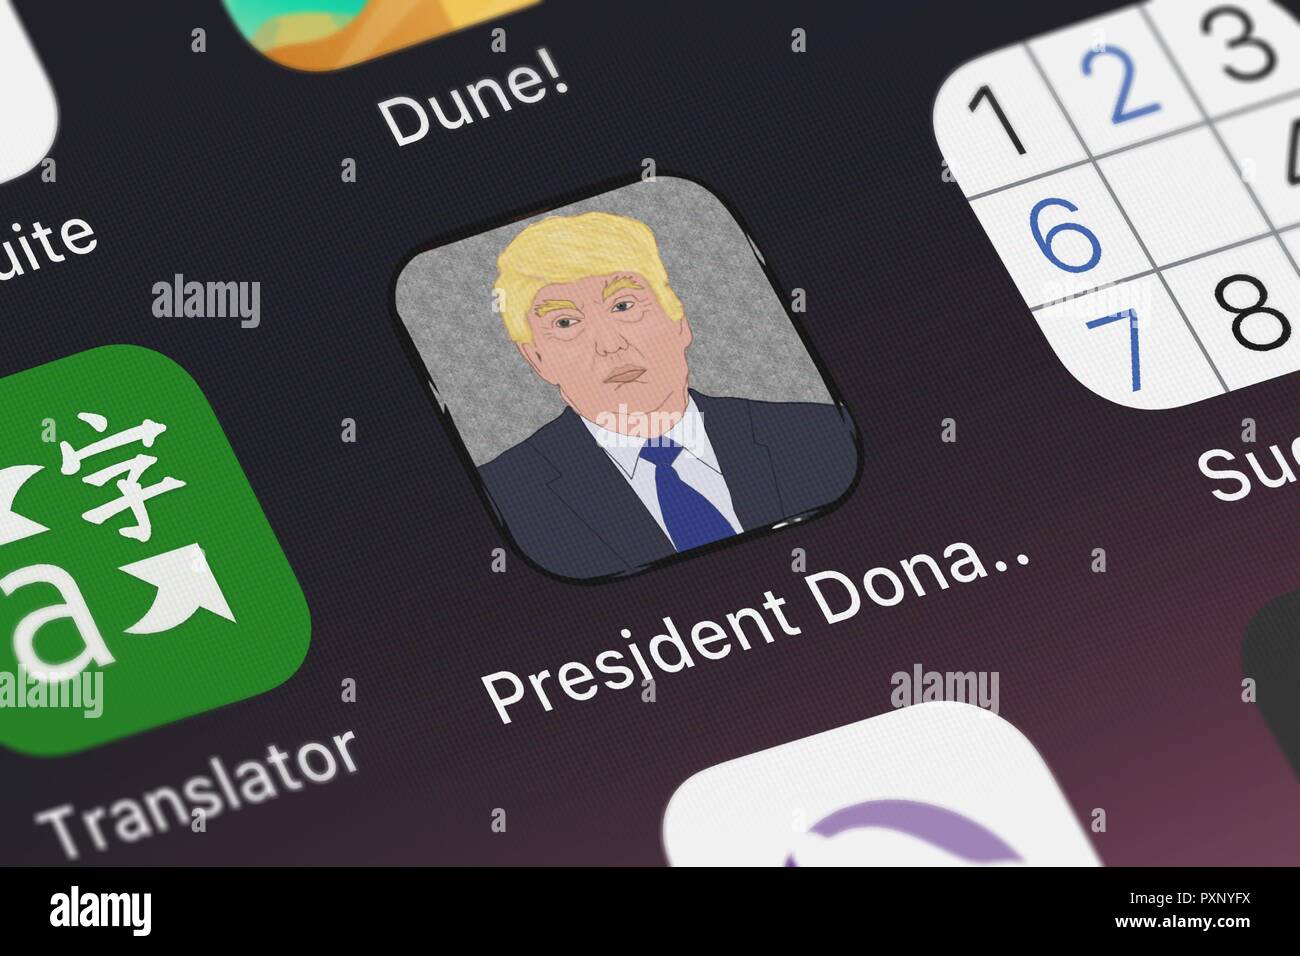 London, United Kingdom - October 23, 2018: Close-up shot of the President Donald Trump Soundboard Free application icon from Romit Dodhia on an iPhone Stock Photo